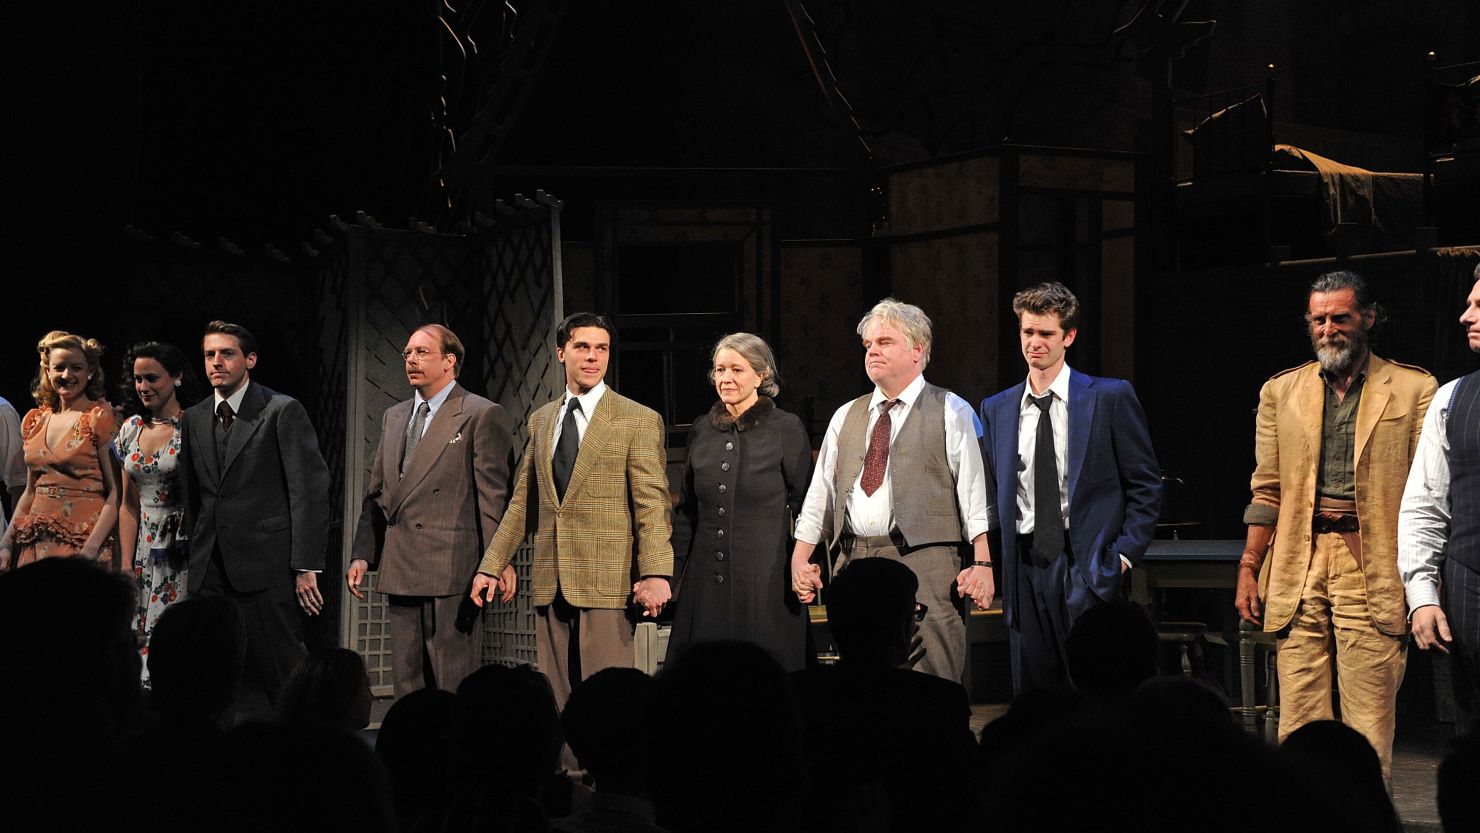 Cast members of "Death of a Salesman" take a curtain call at their Broadway opening on March 15 in New York City.